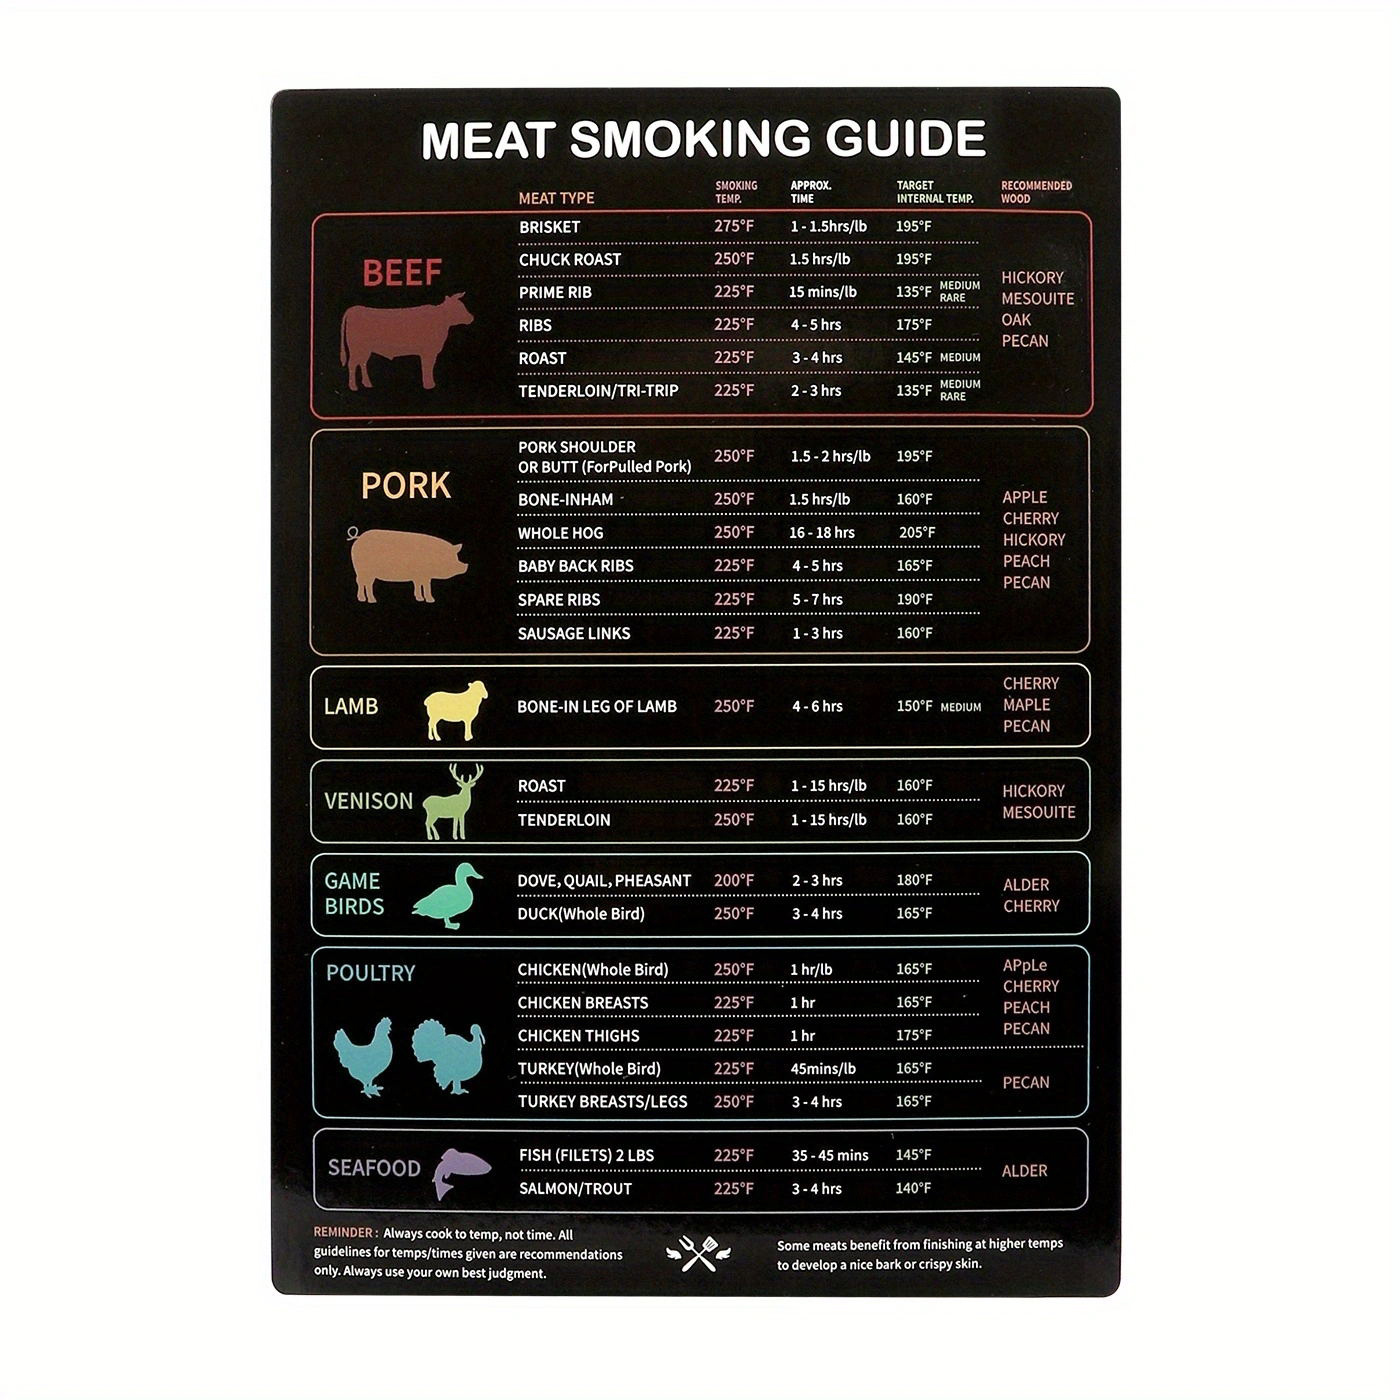 Must-Have Best Meat Smoking Guide Magnet The Only Magnet Covers 31 Meat  Types with Important Smoking Time & Target Temperature BBQ Wood Pellets  Chips